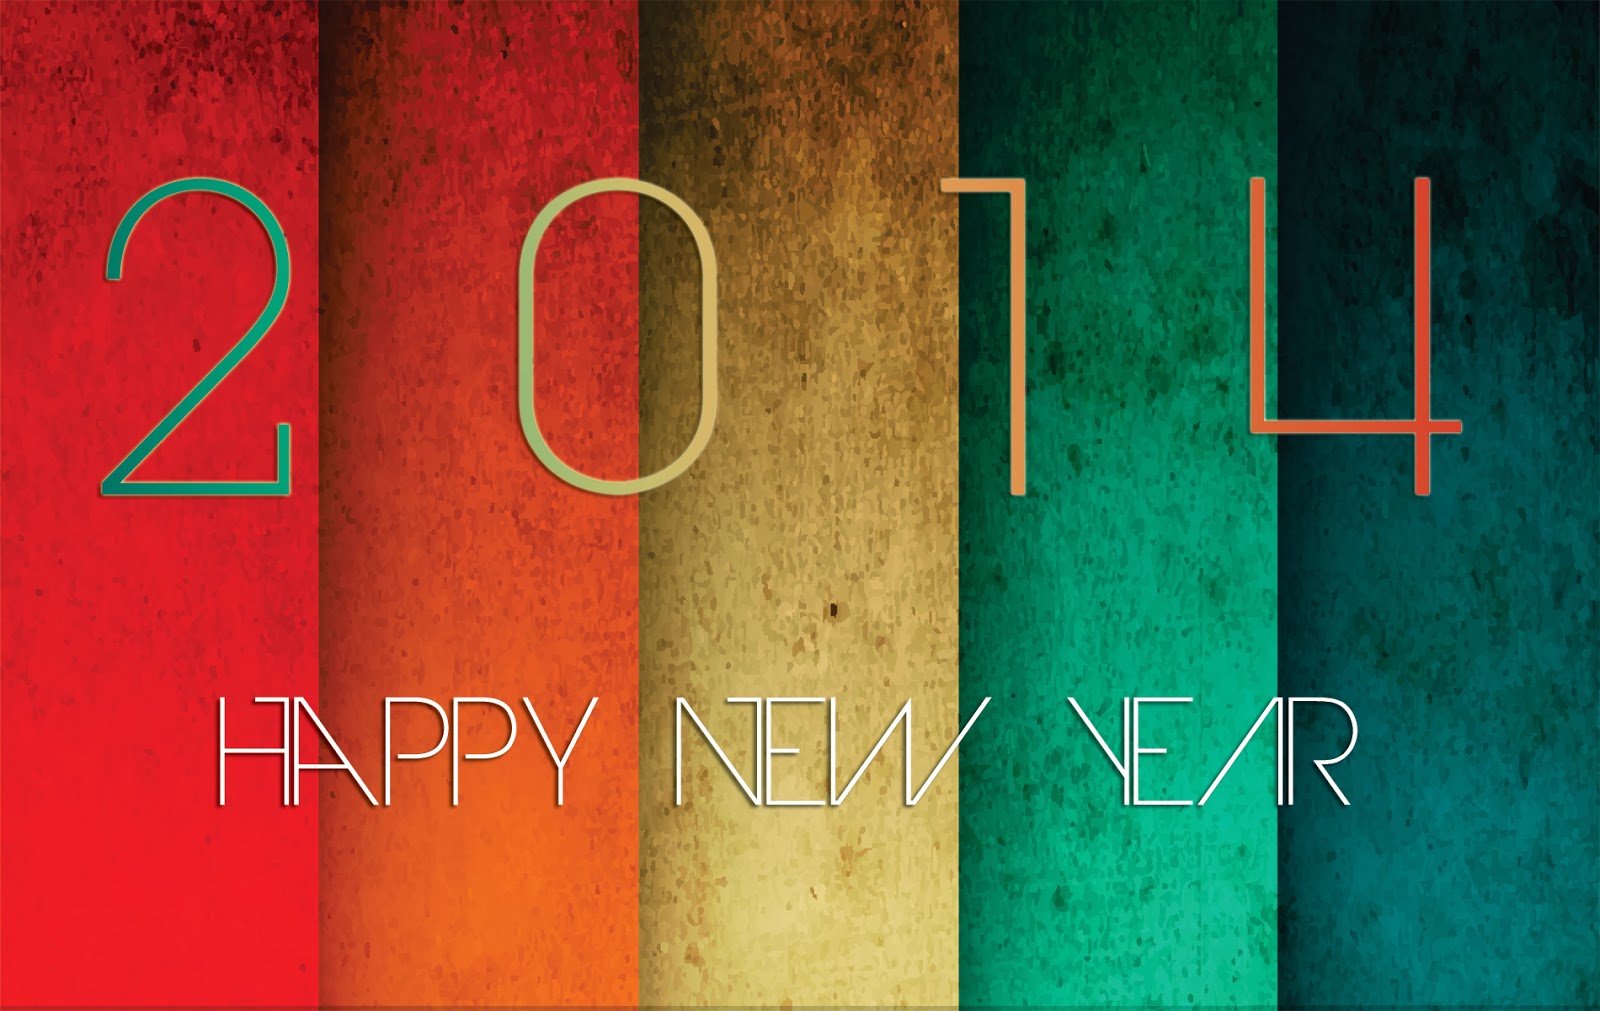 ... 2014: Happy New Year Wishes Wallpapers, Photos - New Year 2014 Fundoo